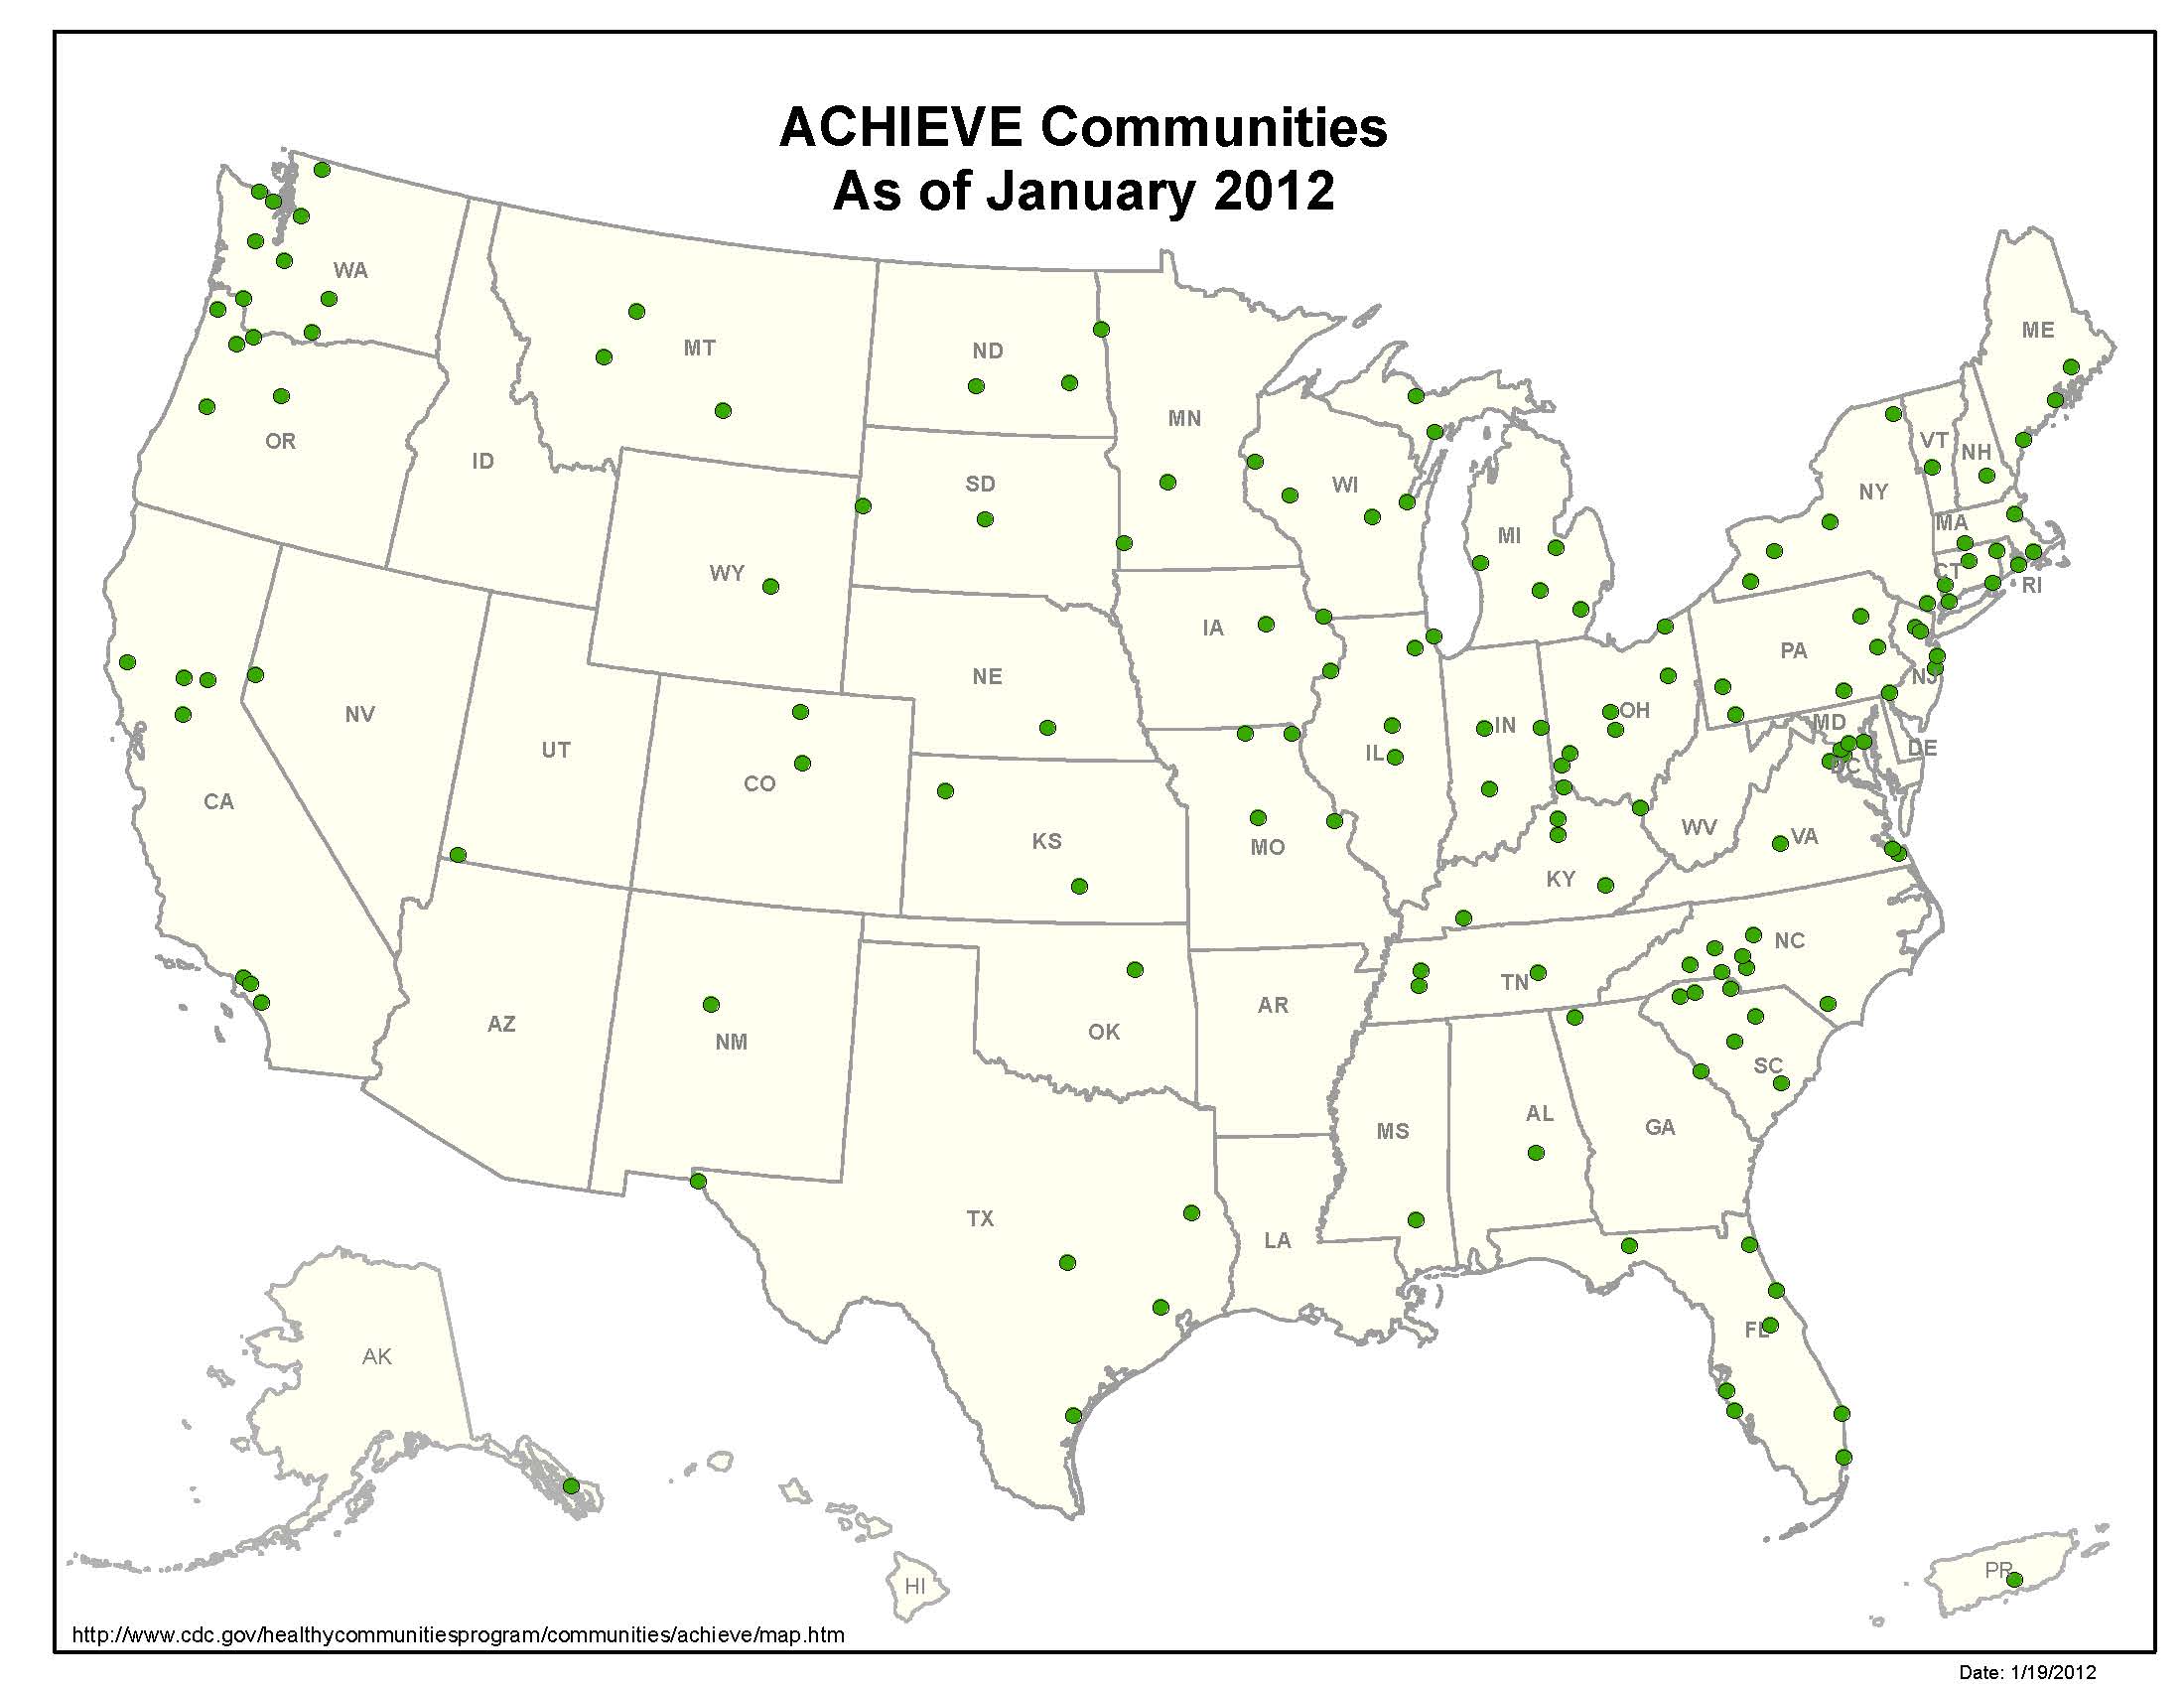 Map via the Centers for Disease Control and Prevention